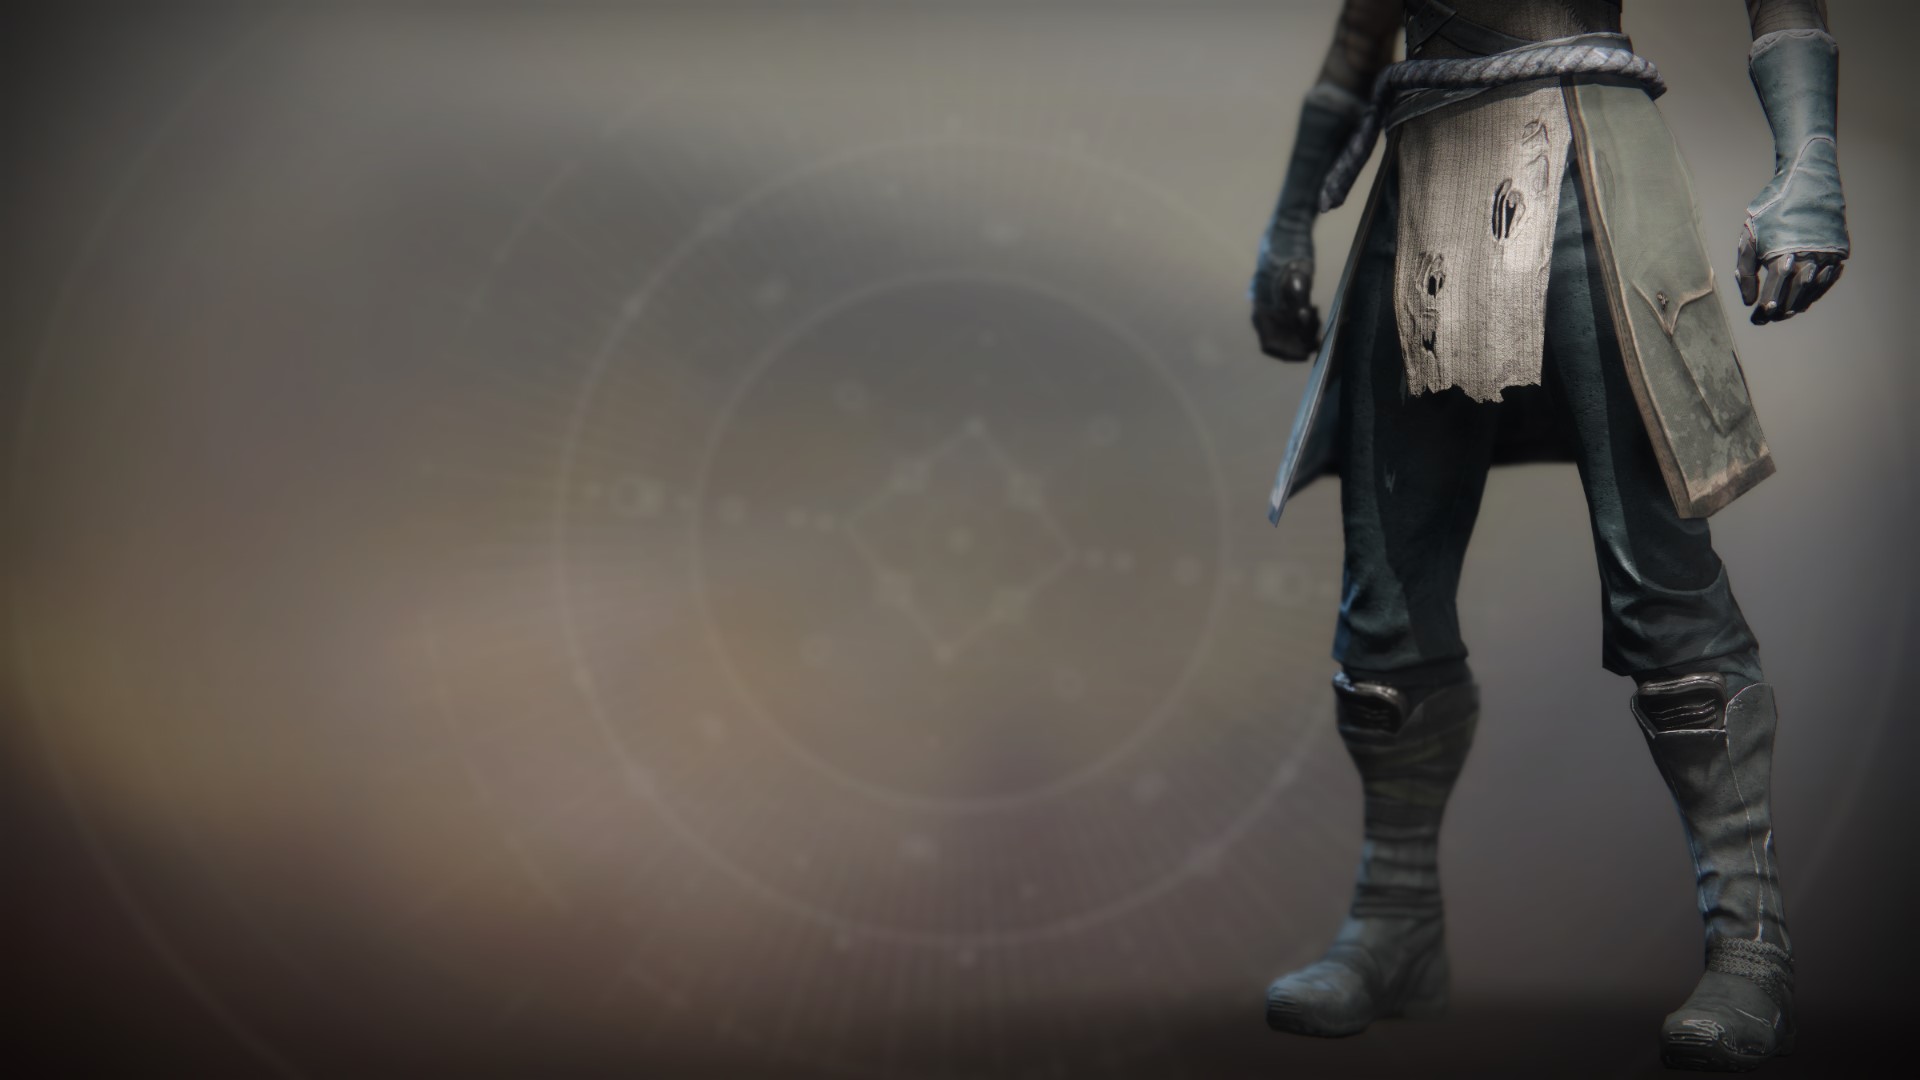 An in-game render of the Refugee Boots.